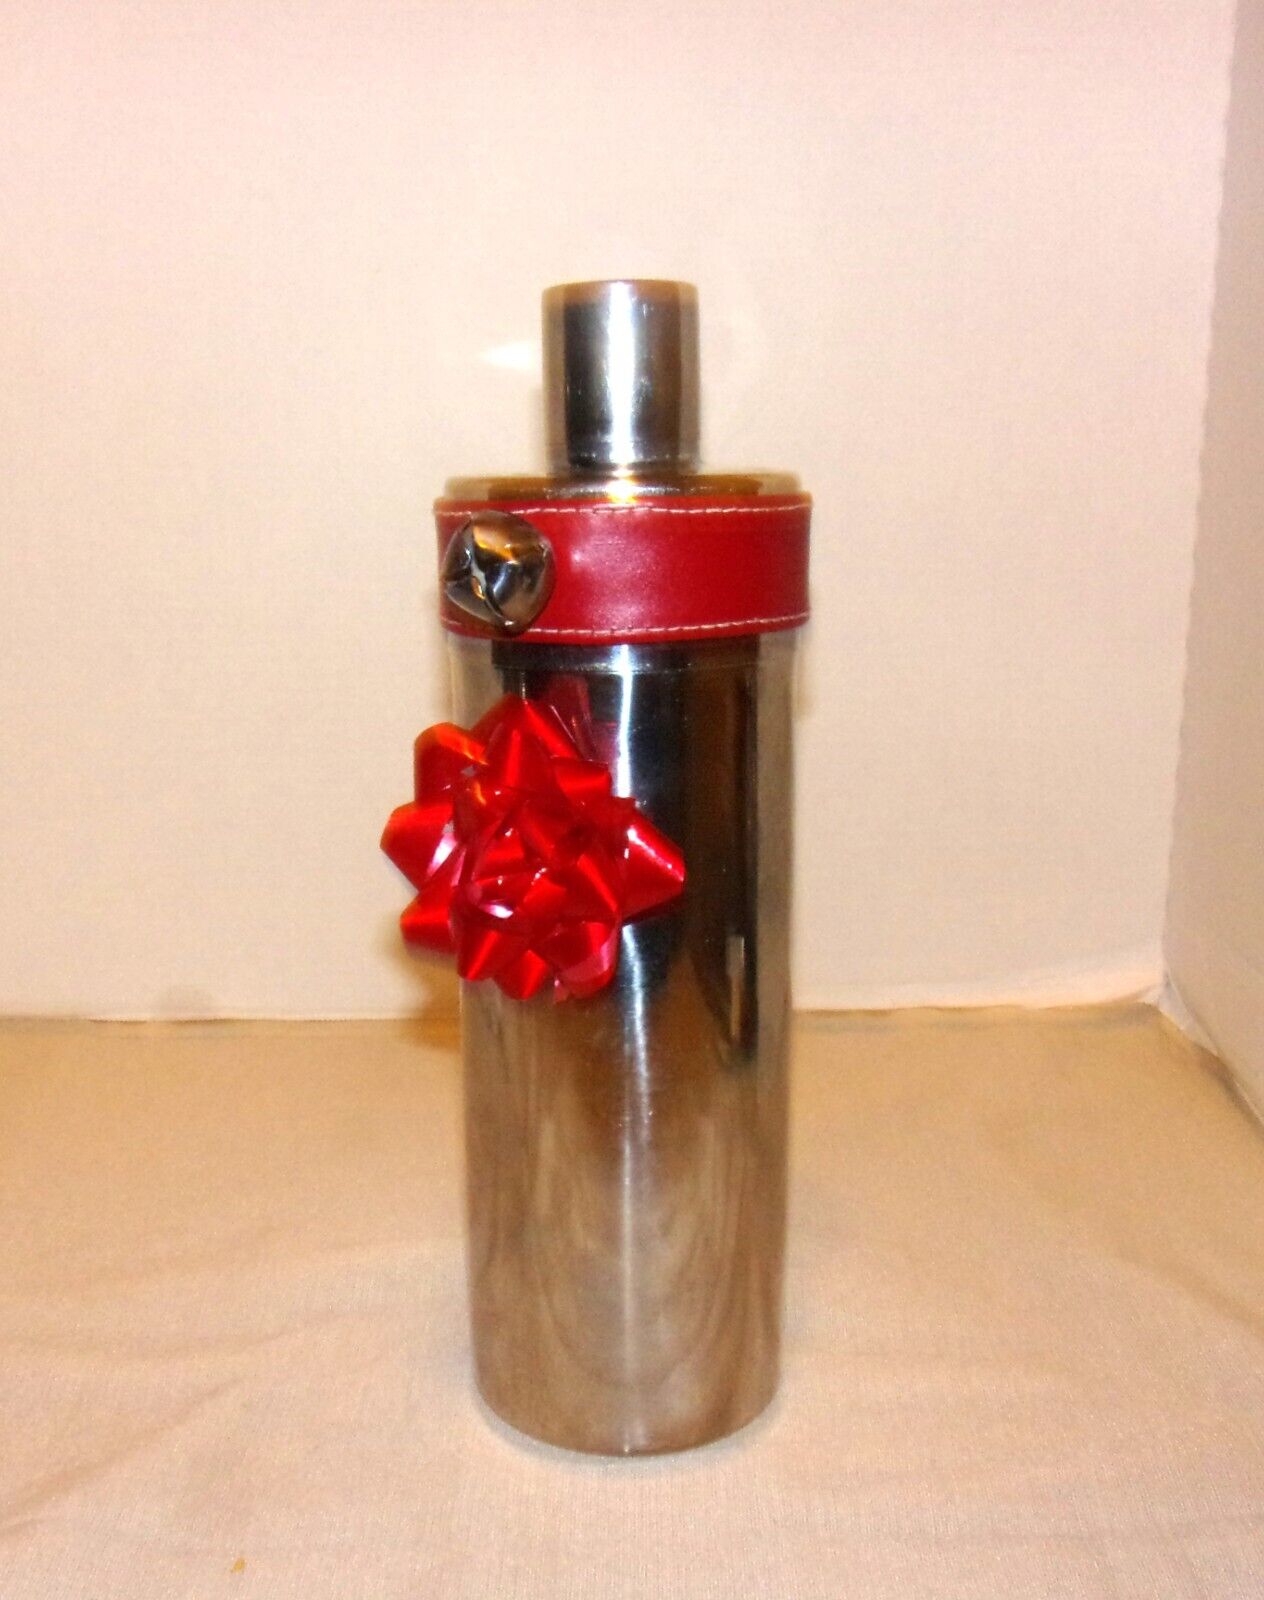 Vintage PVT Ltd. Wazir Chand & Co. Chrome Plated Cocktail Shaker w/Jingle Bell